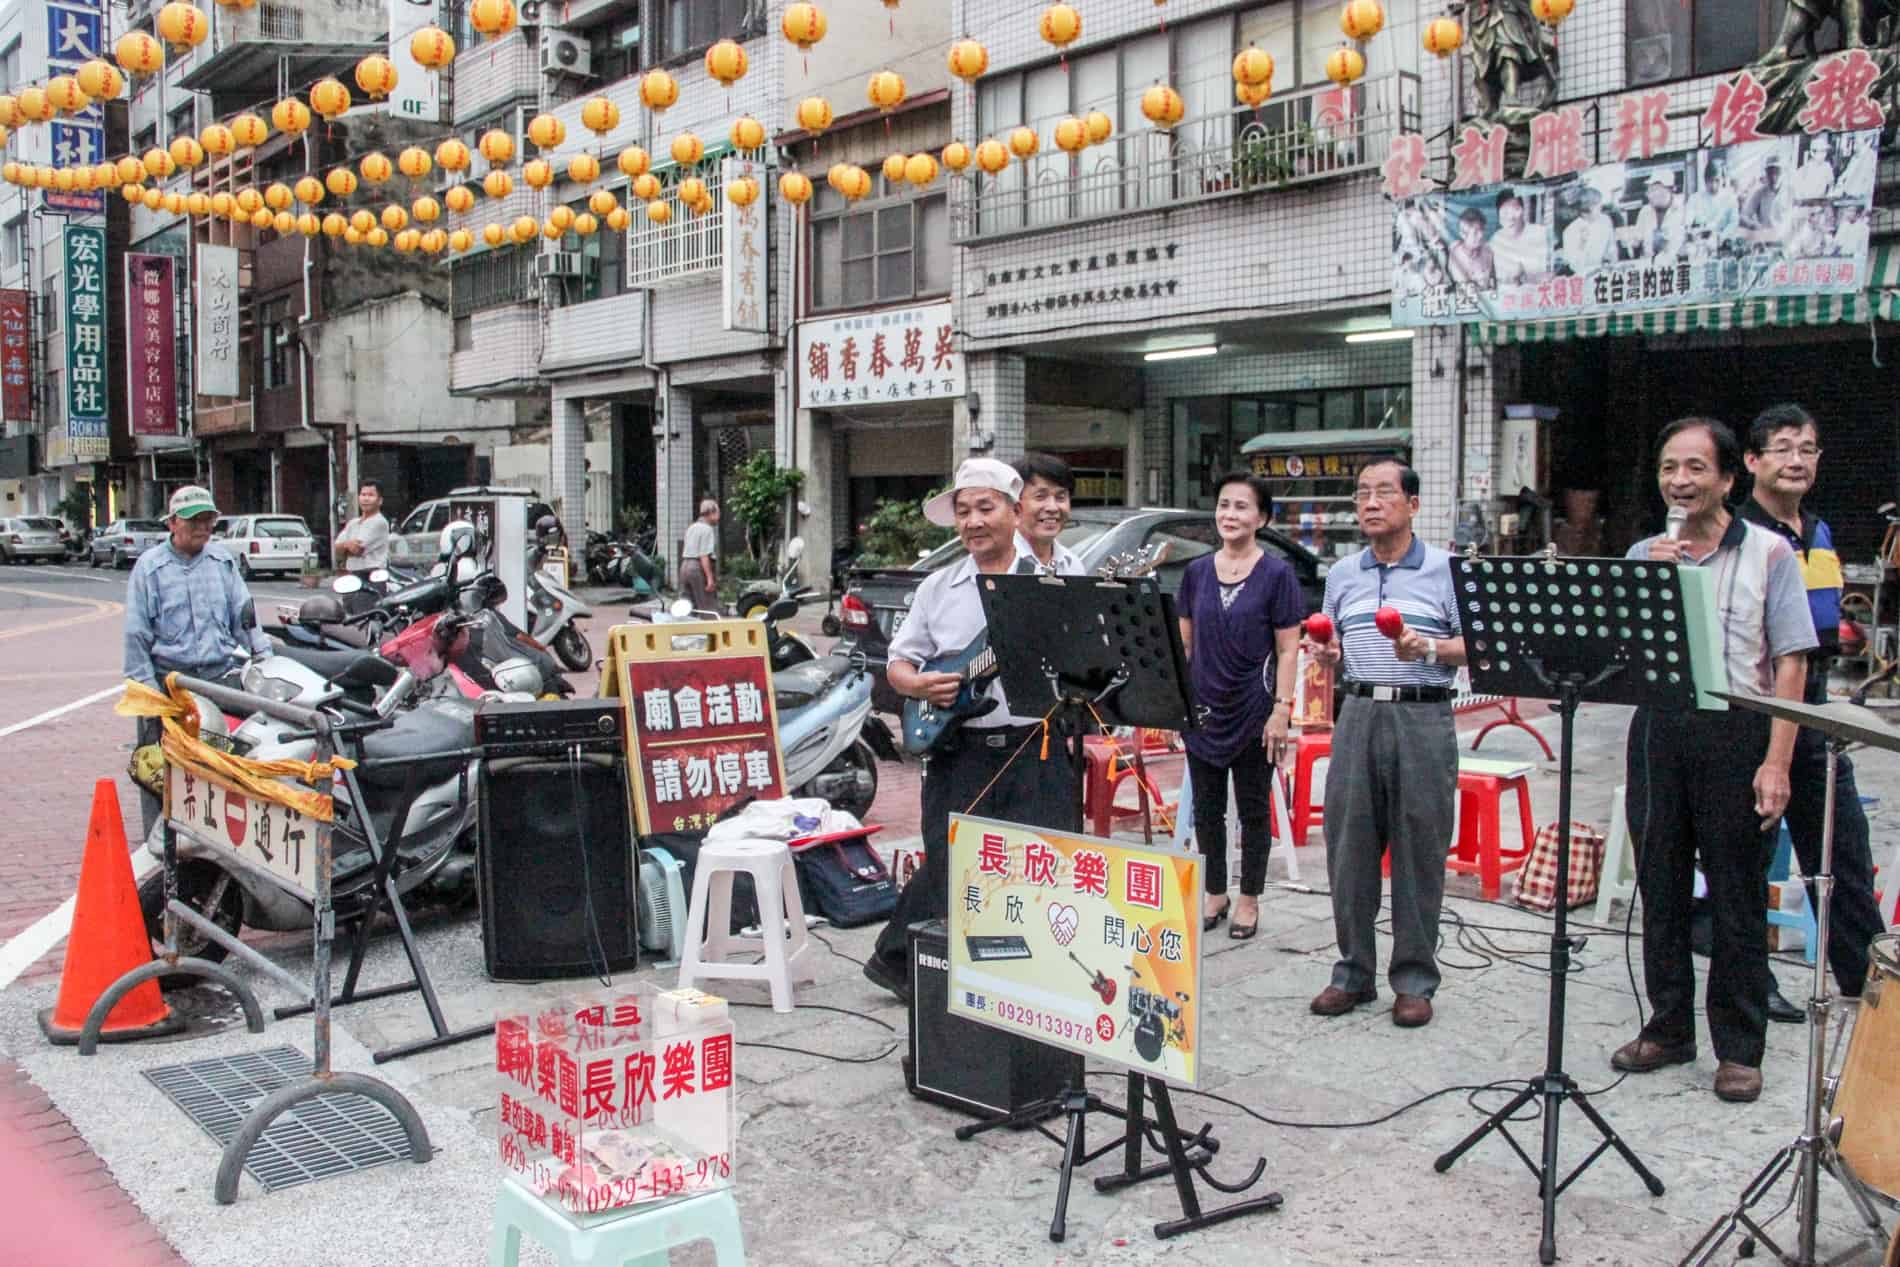 A band plays live music in a street in Tainan, Taiwan. 